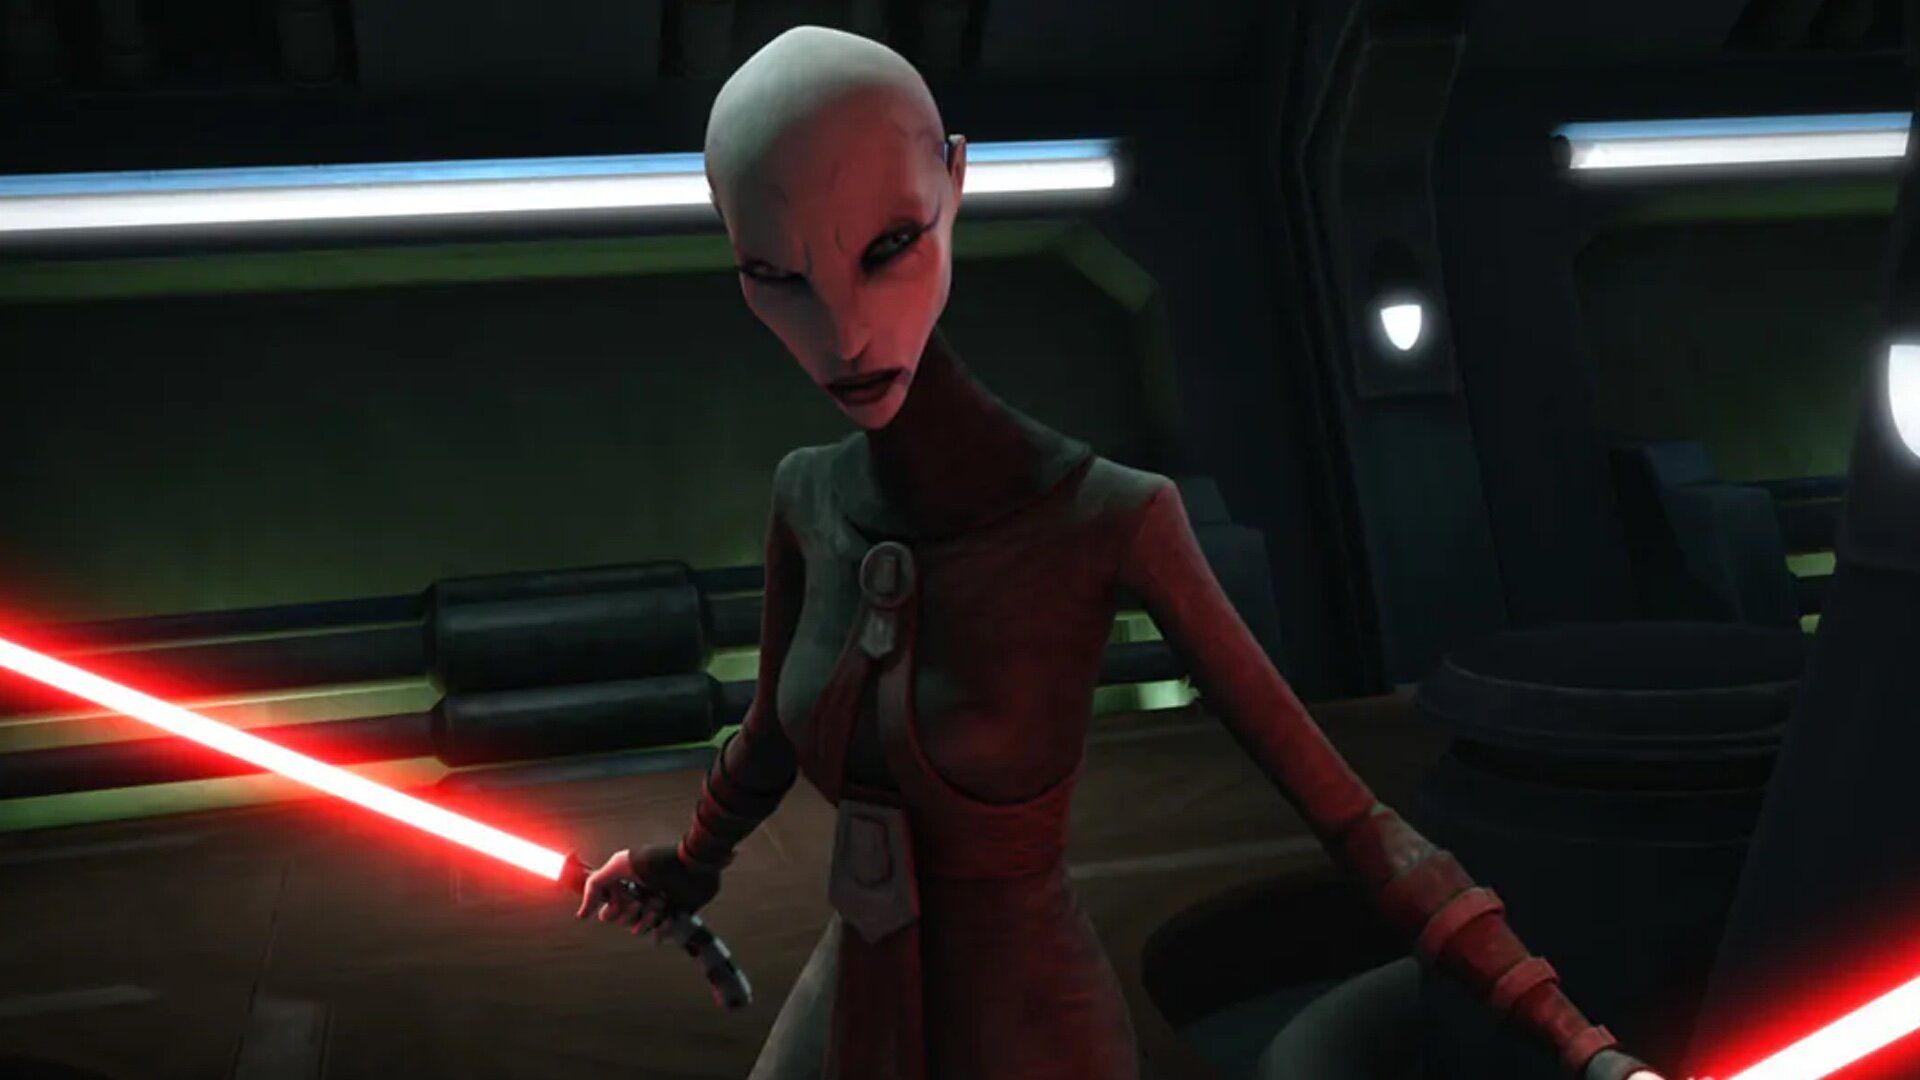 Hasbro Introduces Asajj Ventress And Kit Fisto Lightsabers To Their Force FX Elite Line Up